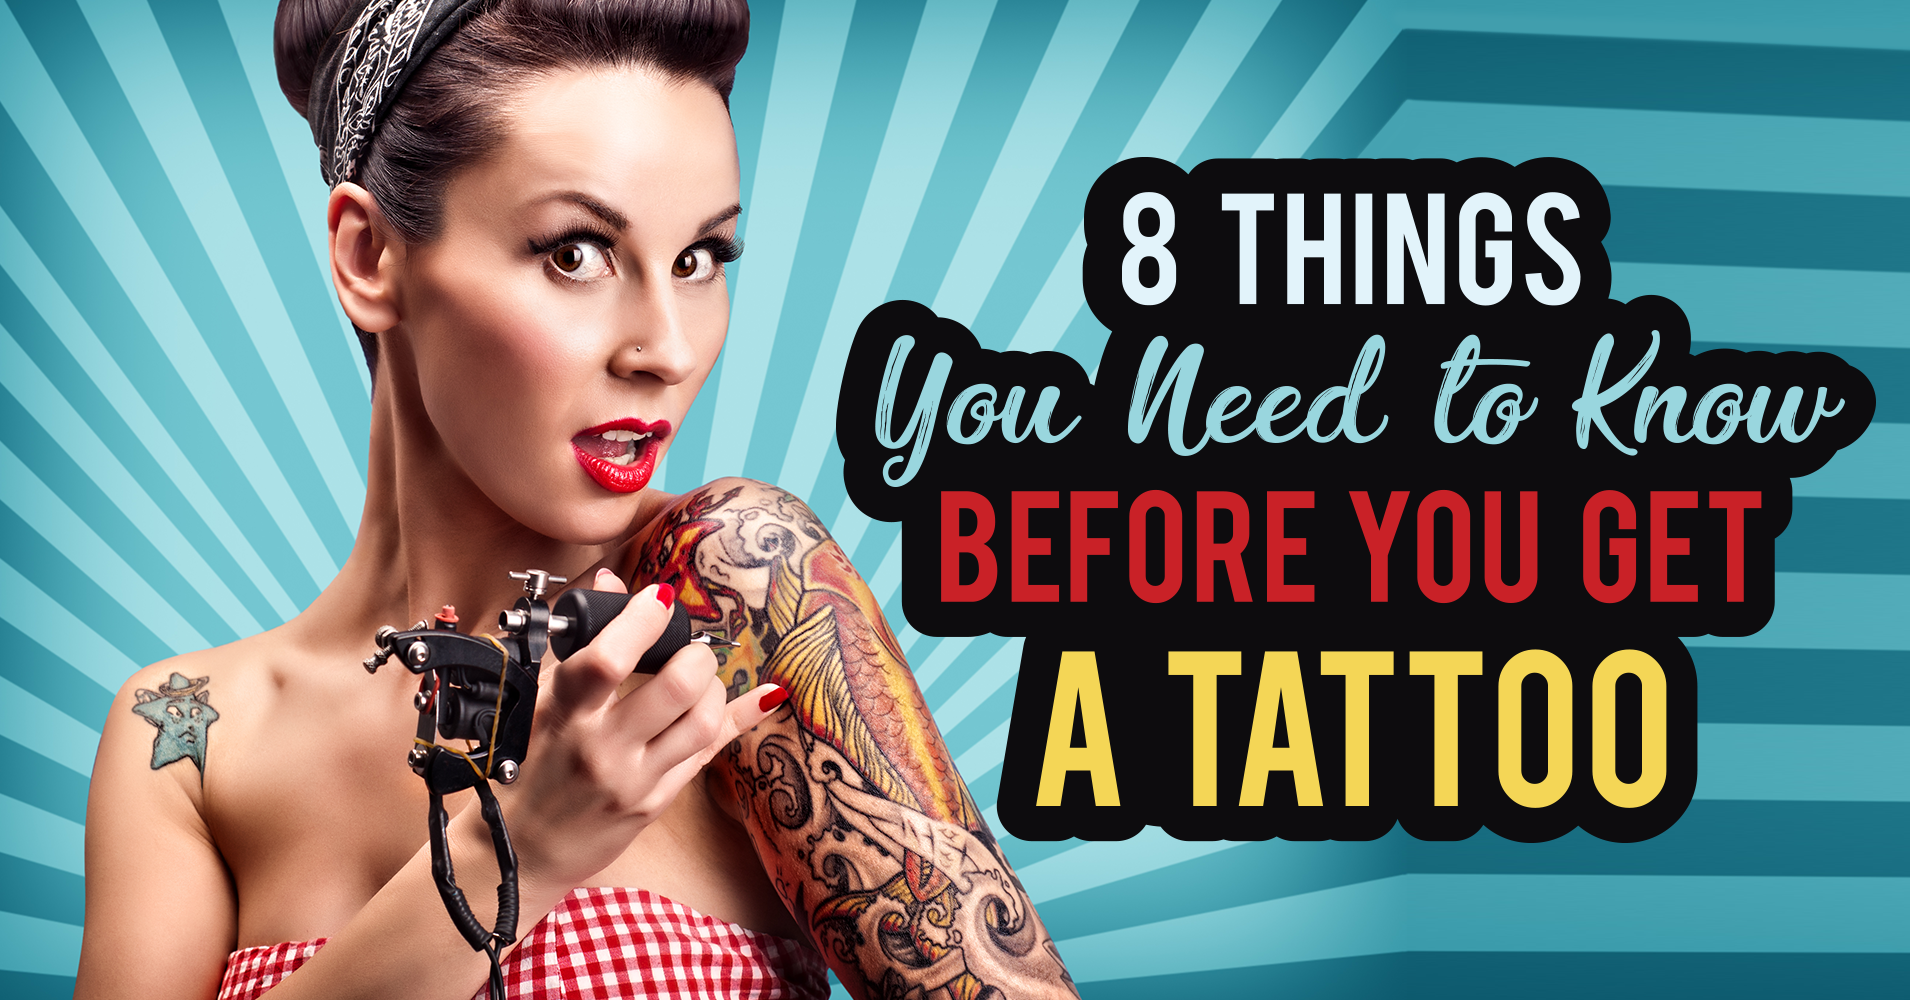 8 Things You Need To Know Before You Get A Tattoo Article